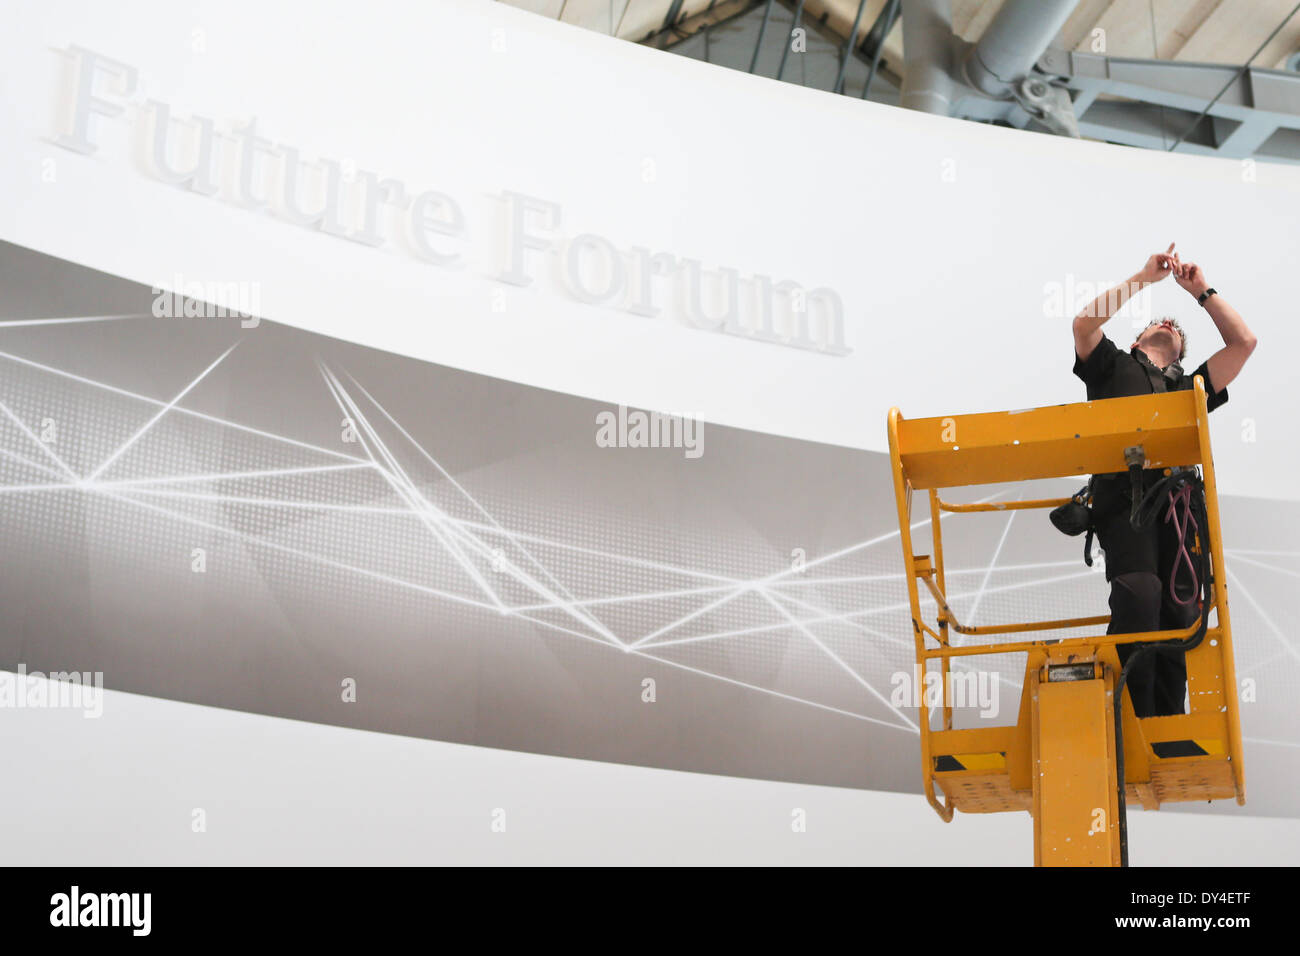 Hanover, Germany. 6th Apr, 2014. A worker works at an Siemens' stand of 2014 Hanover Industrial Trade Fair in Hanover, Germany, on Apr. 6, 2014. The fair will run from April 7 to 11 with Holland as its partner country. © Zhang Fan/Xinhua/Alamy Live News Stock Photo